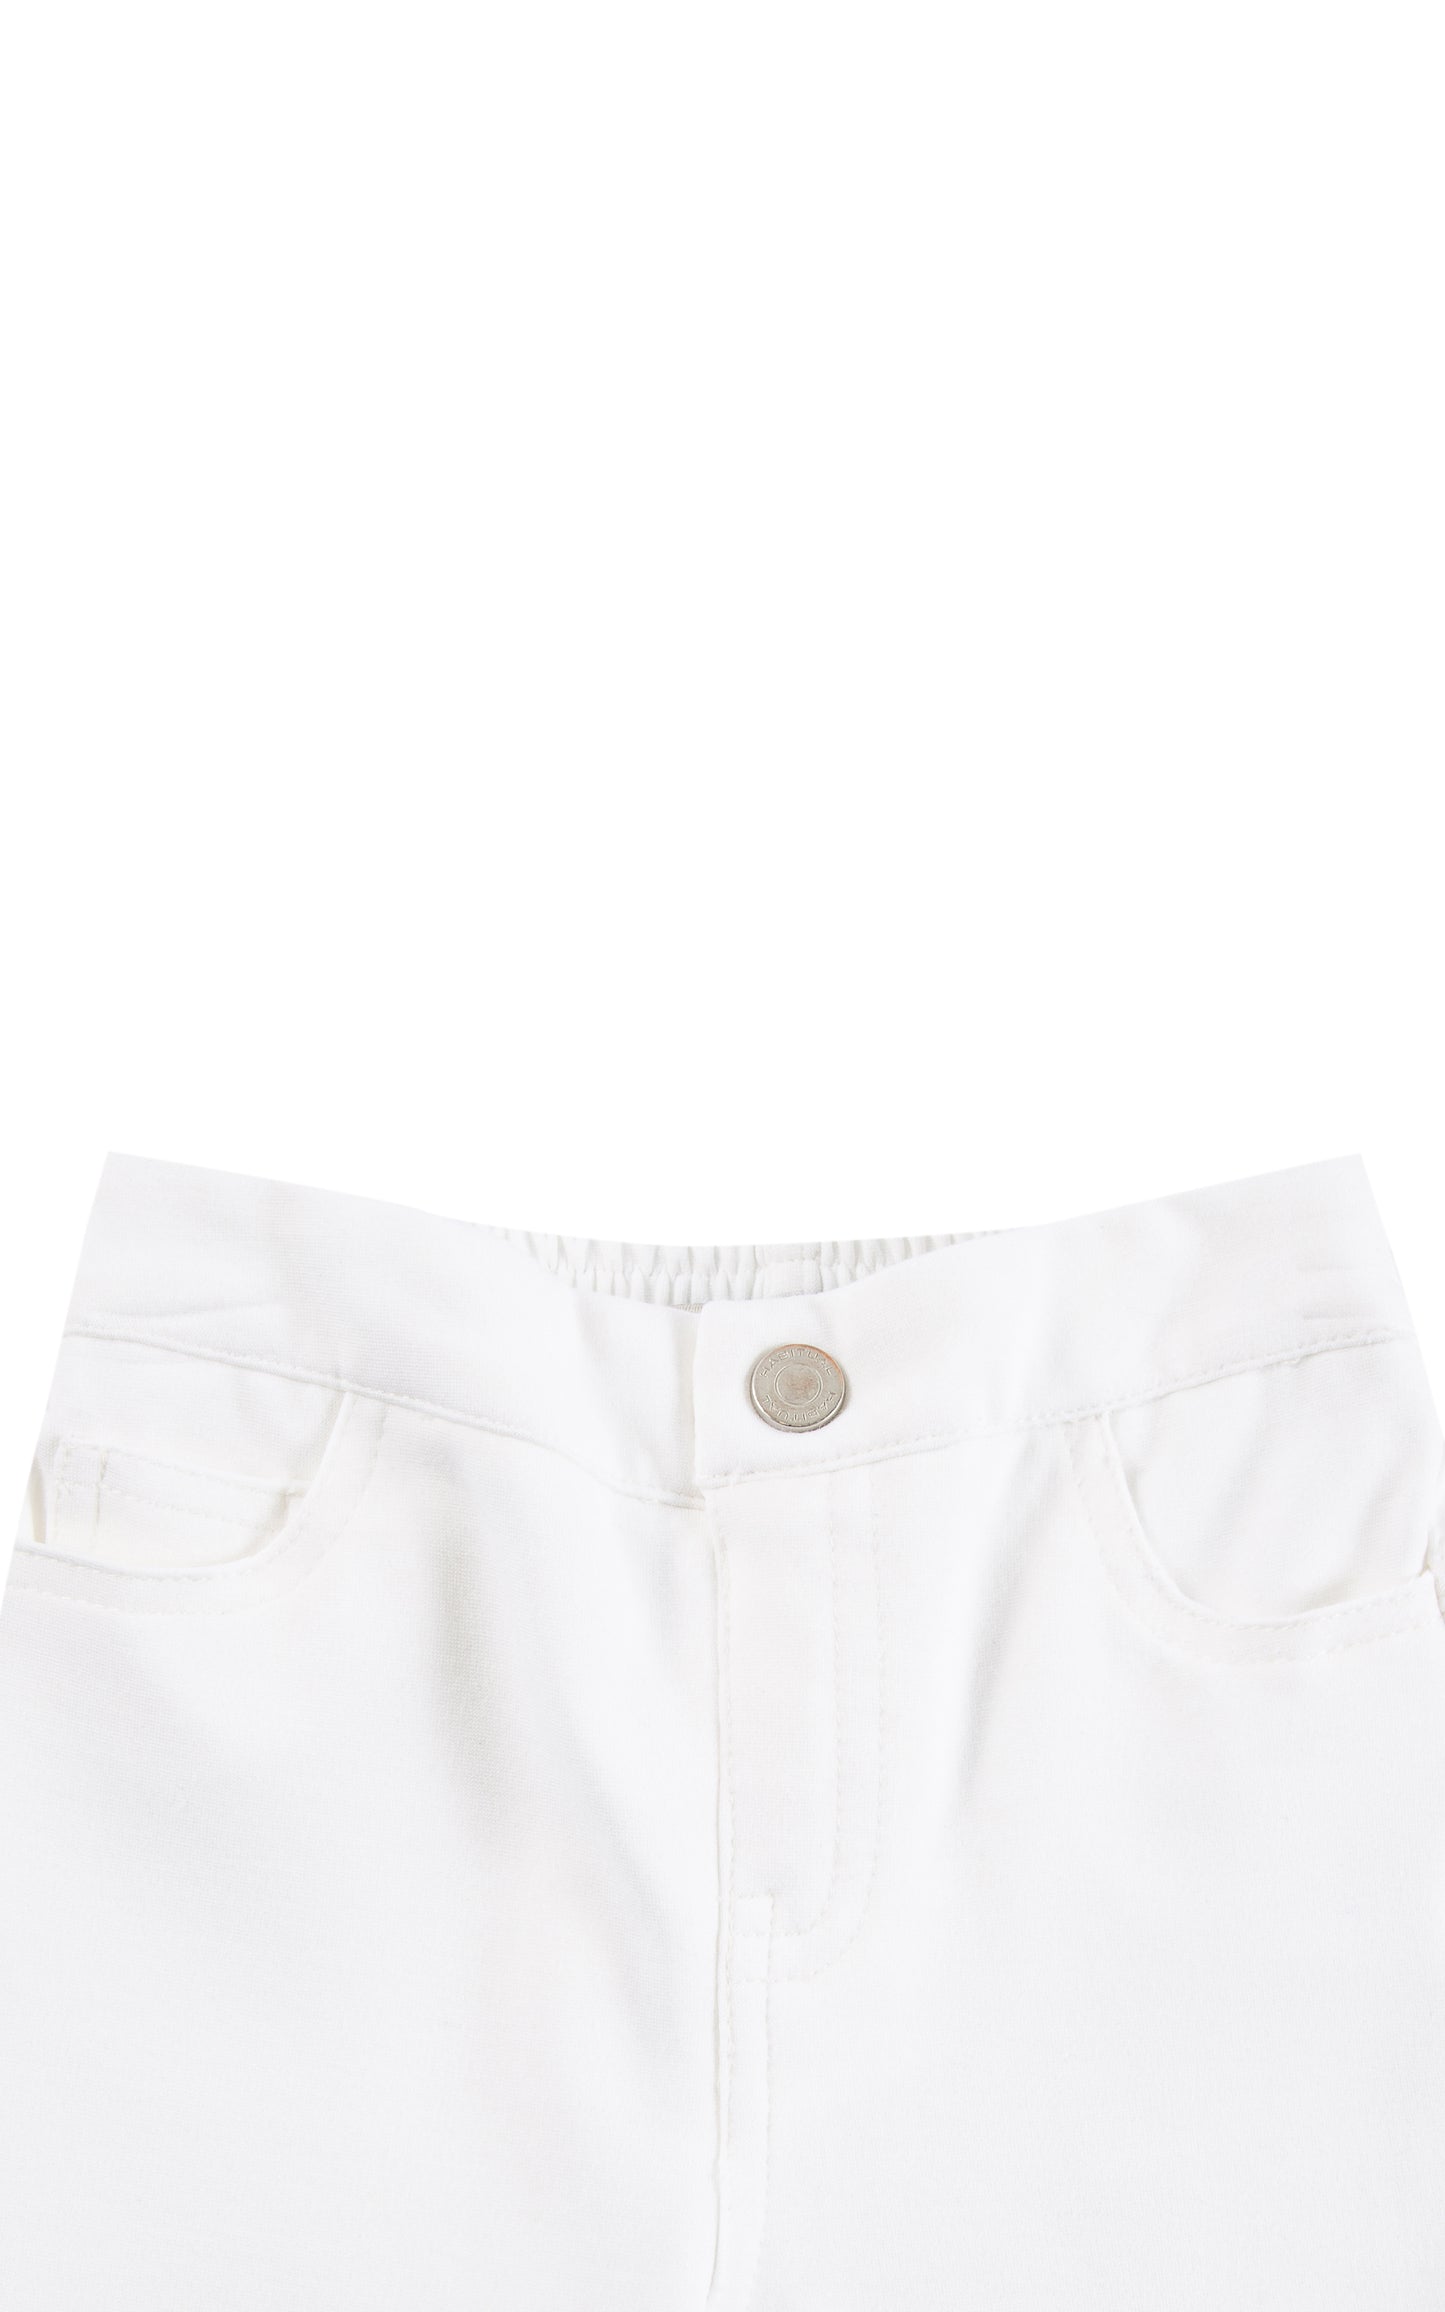 CLOSE UP OF WAISTBAND OF WHITE JEANS